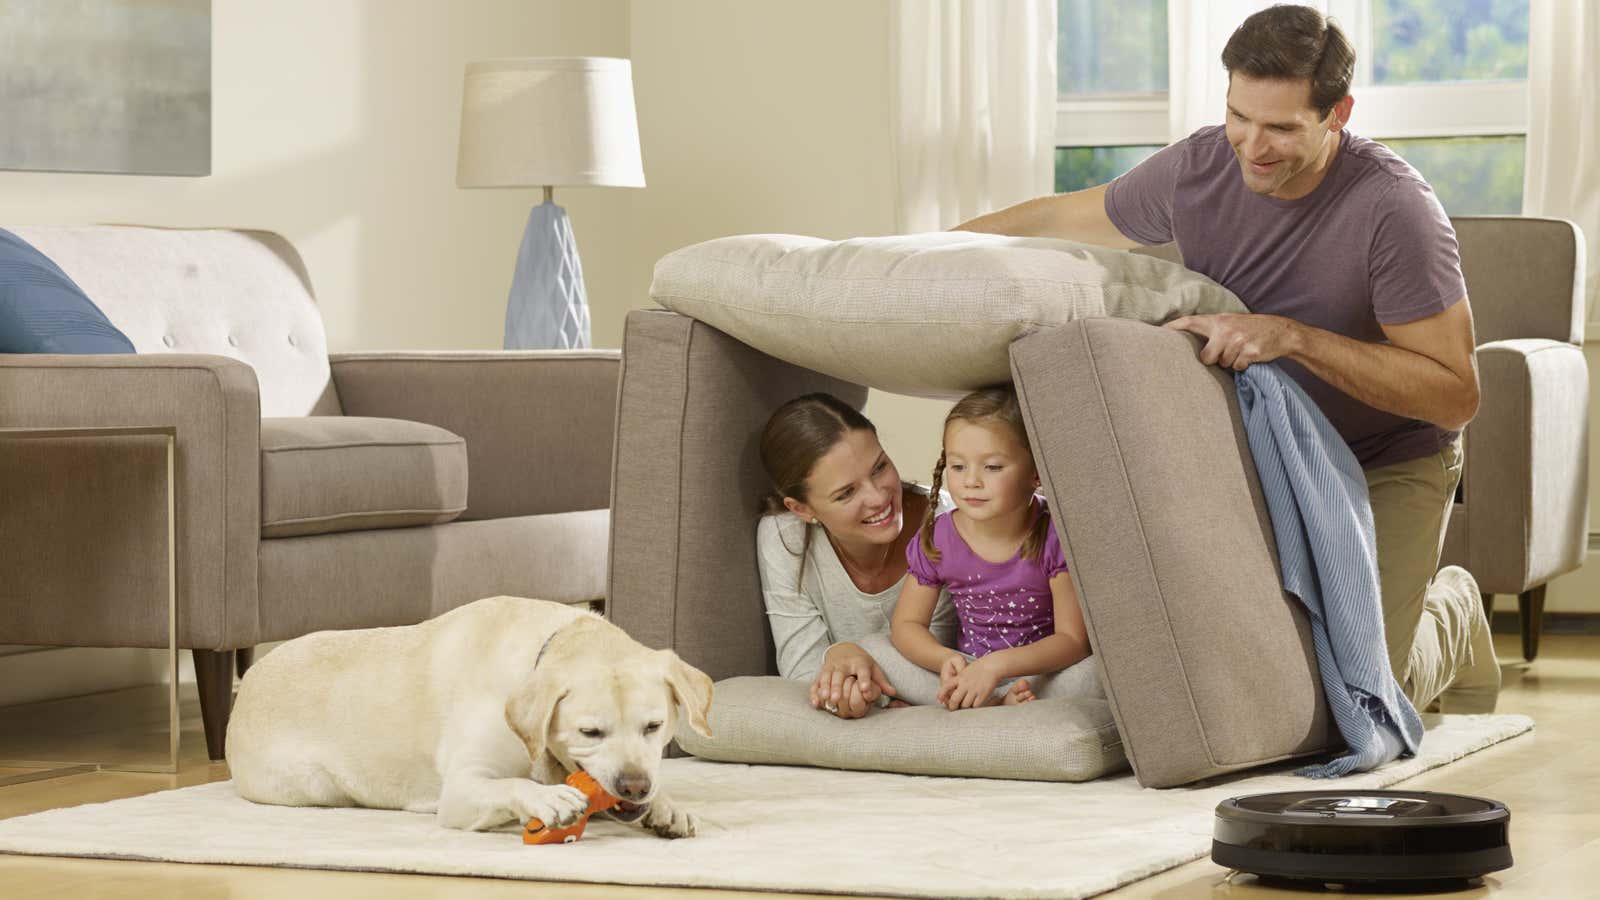 Spend more time making proper forts and less time vacuuming.